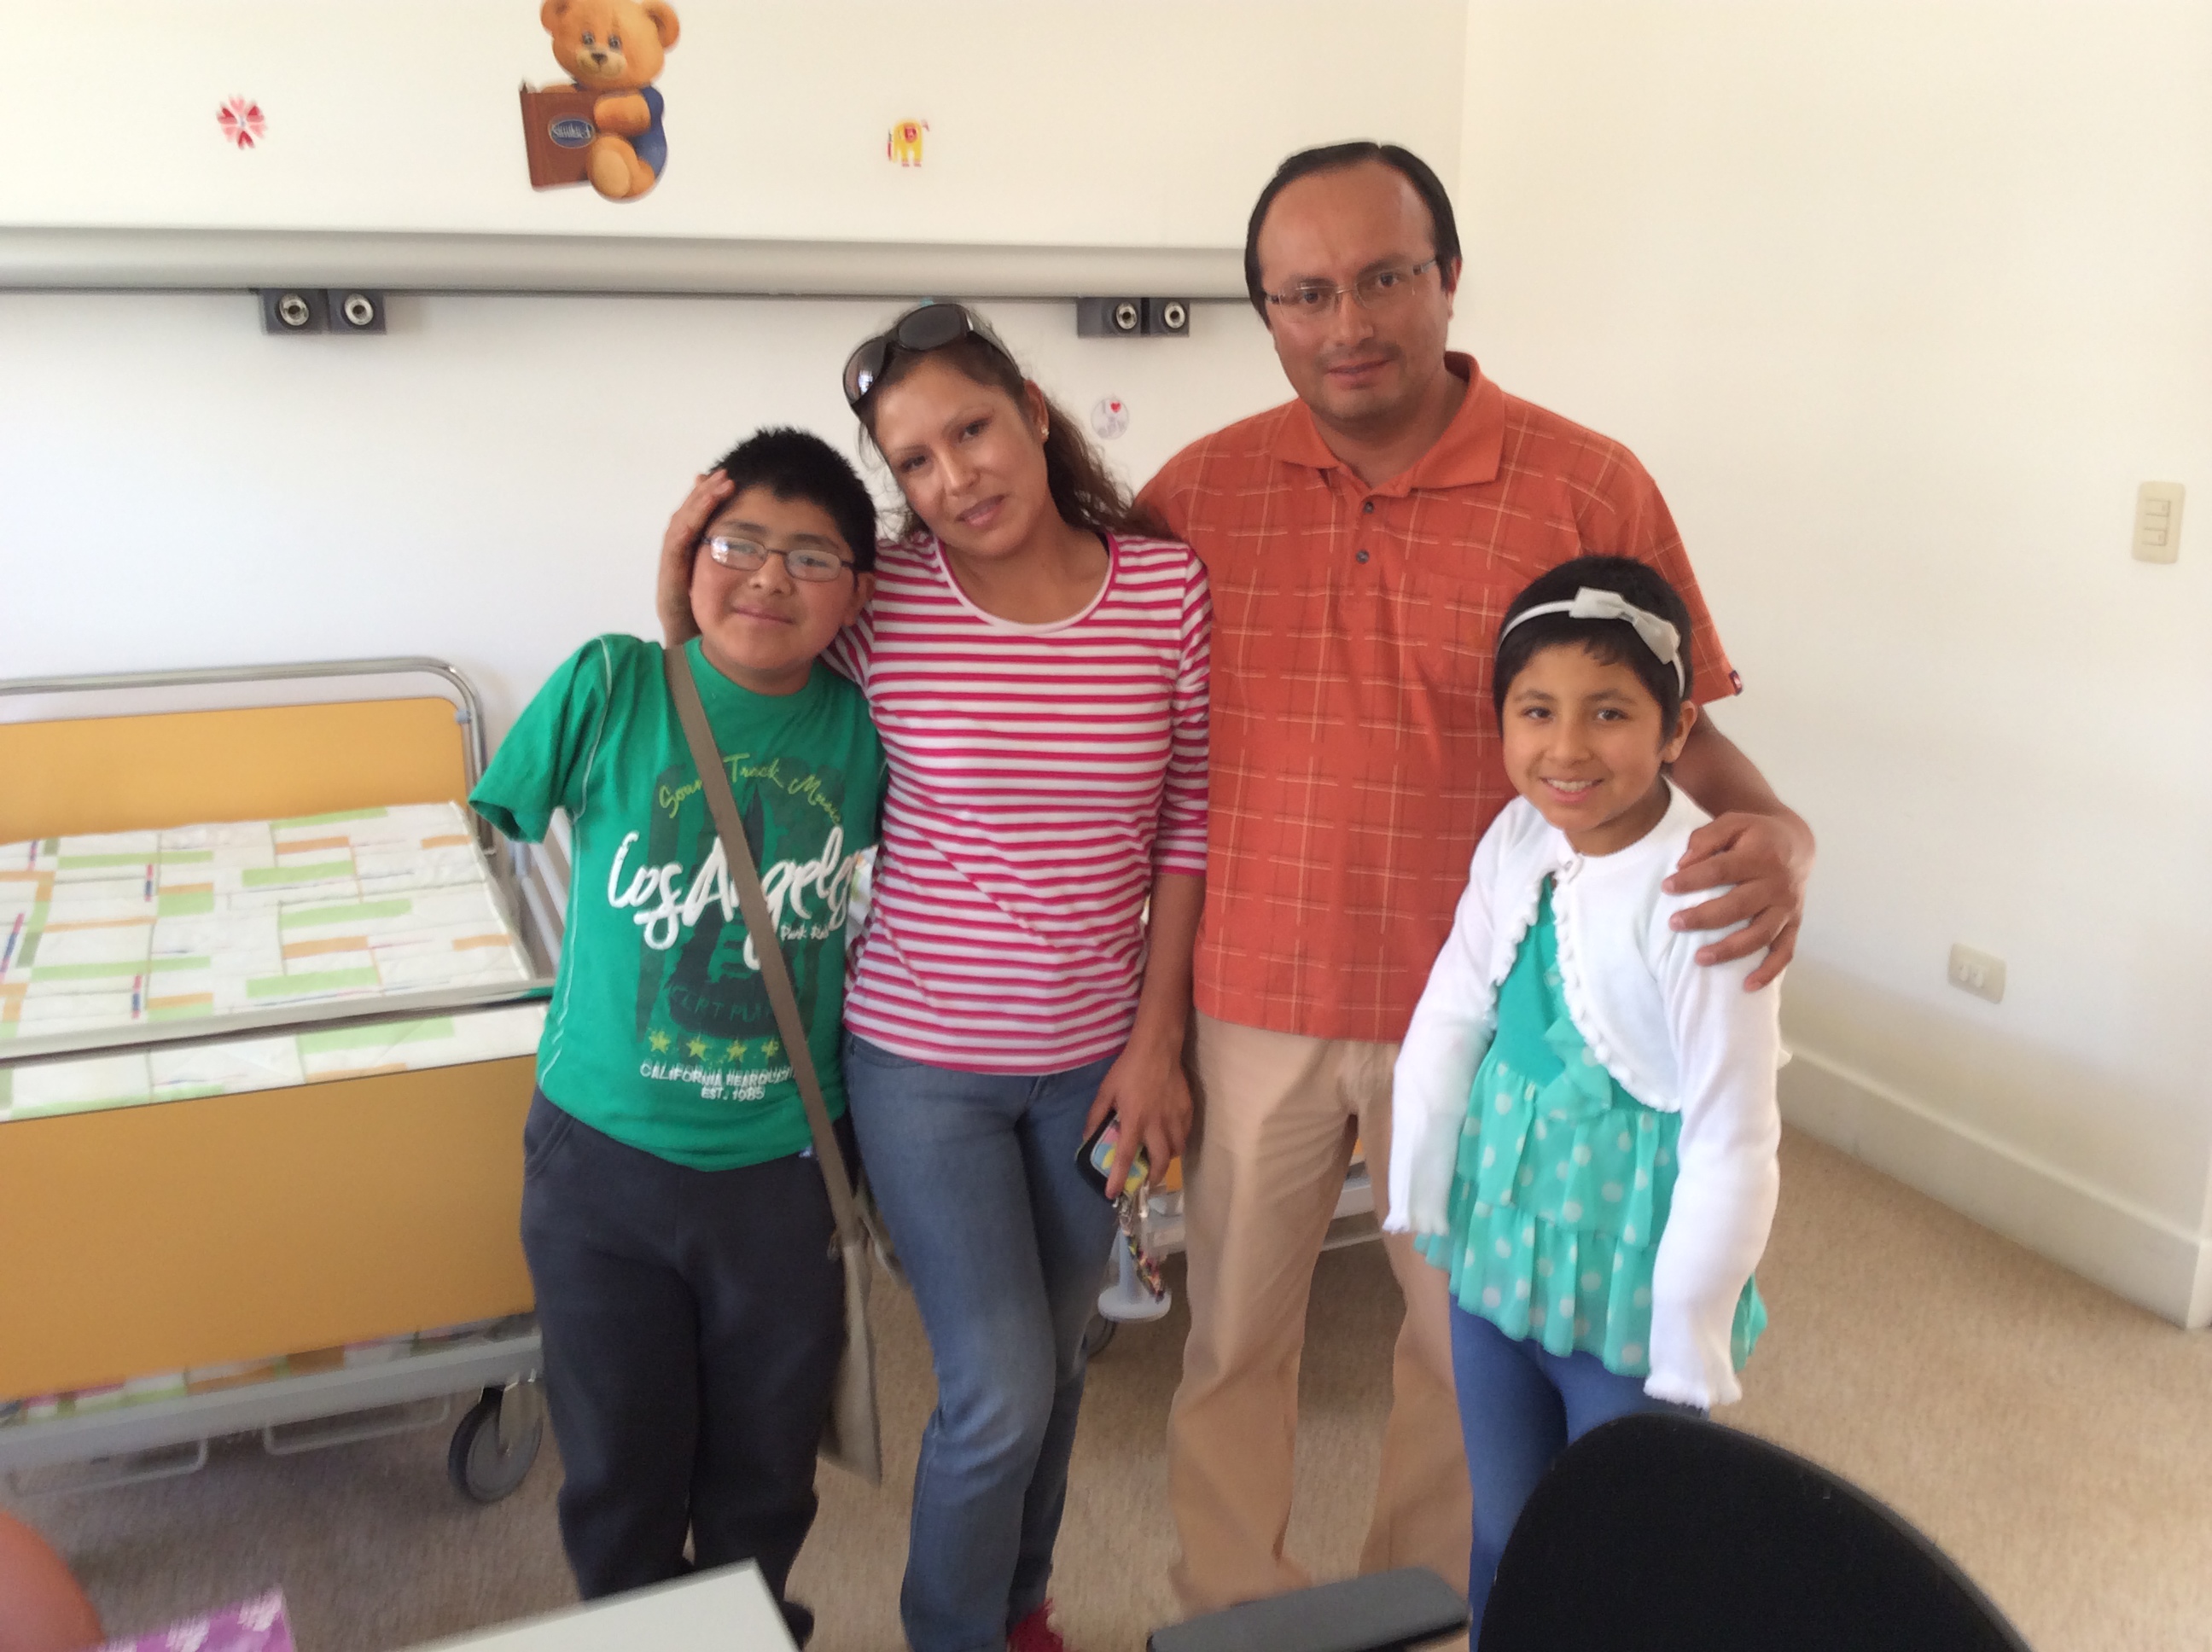 Thank you very much to the family Arnajan from Arequipa